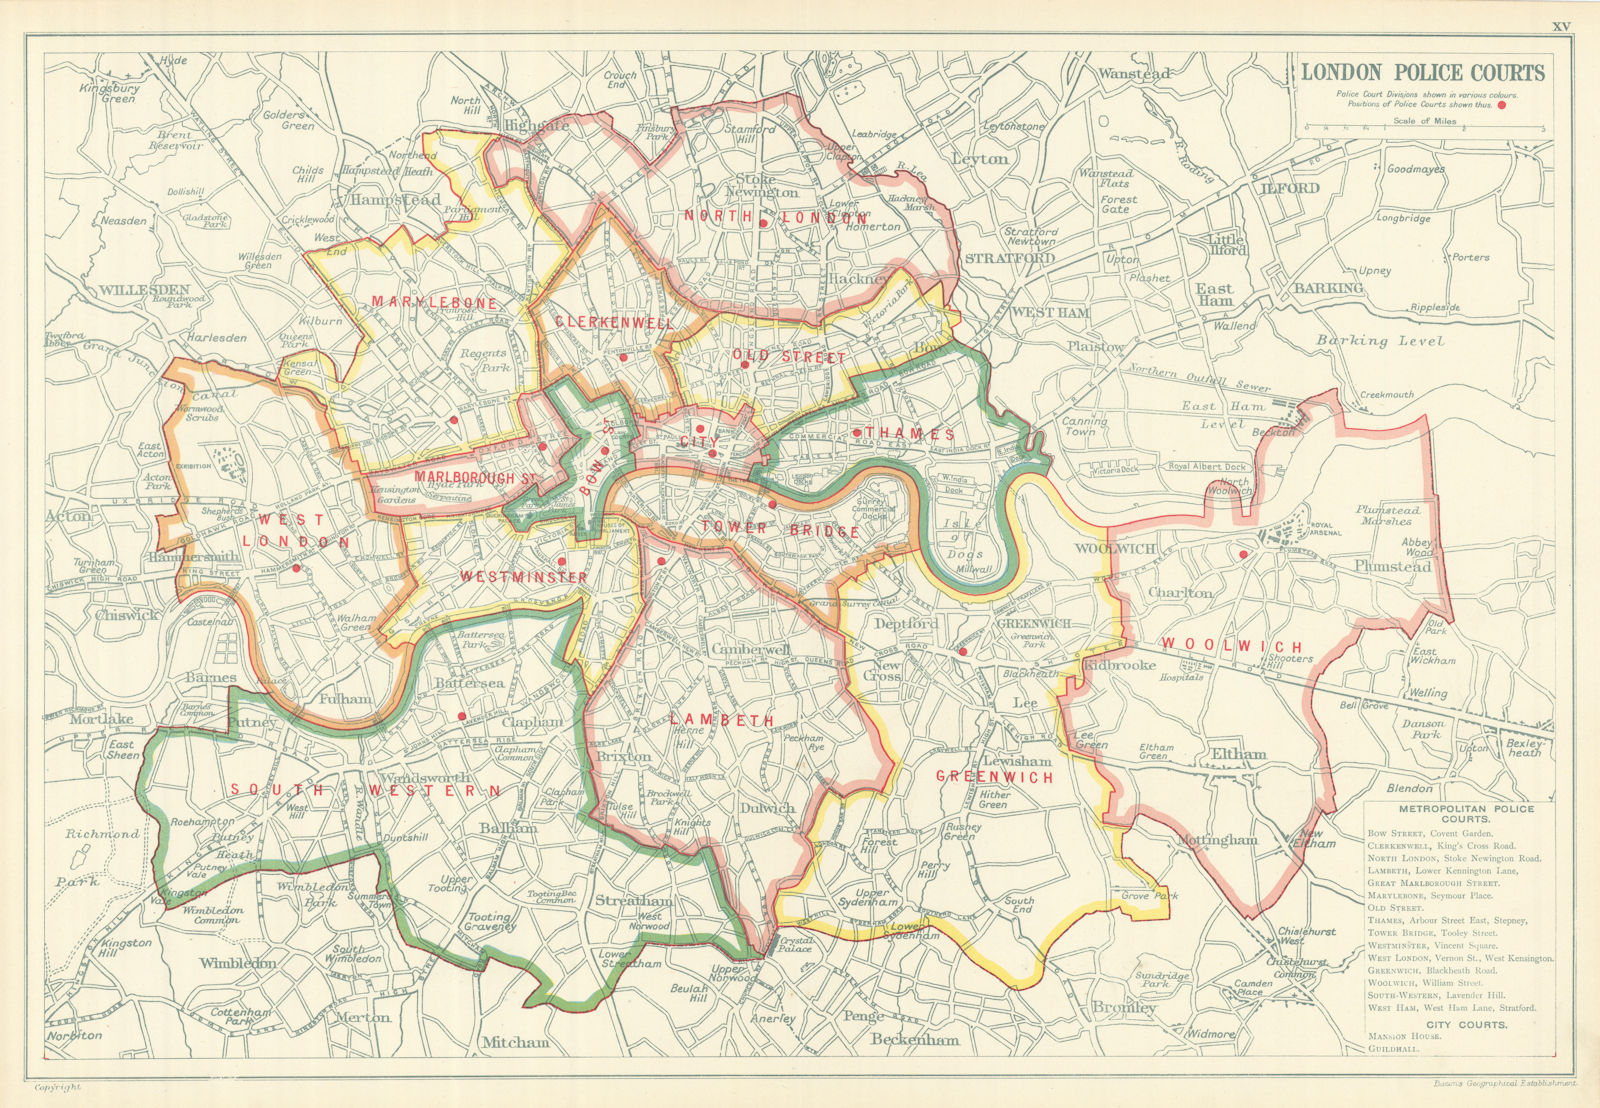 Associate Product LONDON POLICE COURTS. Showing divisions & court locations. BACON 1919 old map